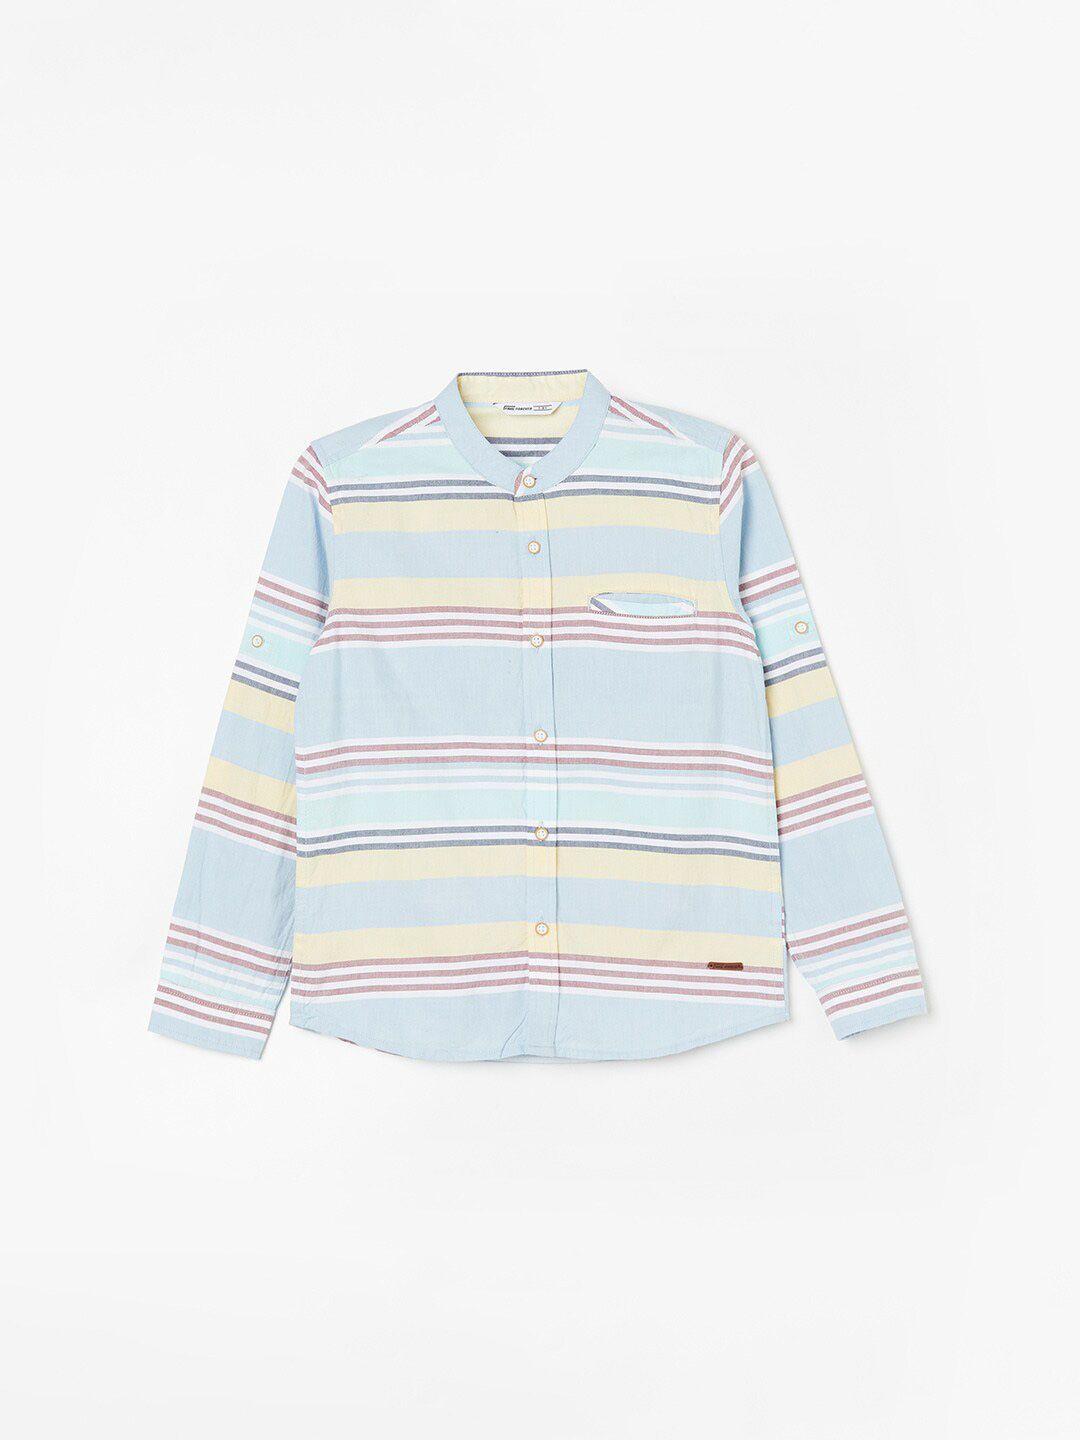 fame-forever-by-lifestyle-boys-horizontal-striped-mandarin-collar-cotton-casual-shirt